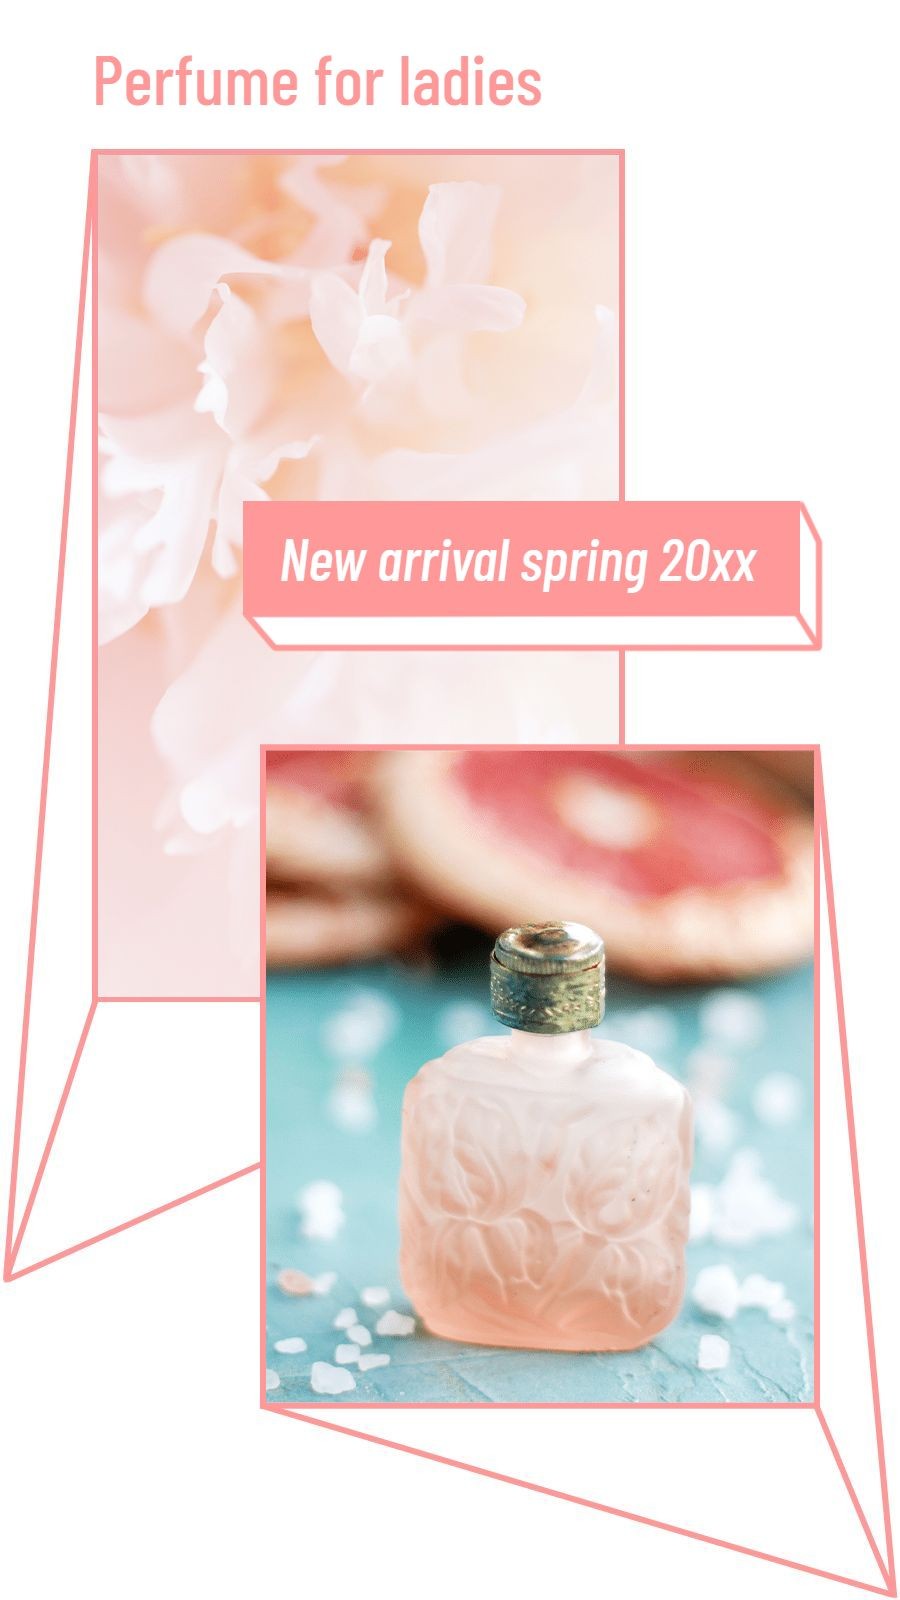 Simple Fashion Perfume Spring New Arrival Display Instagram Story